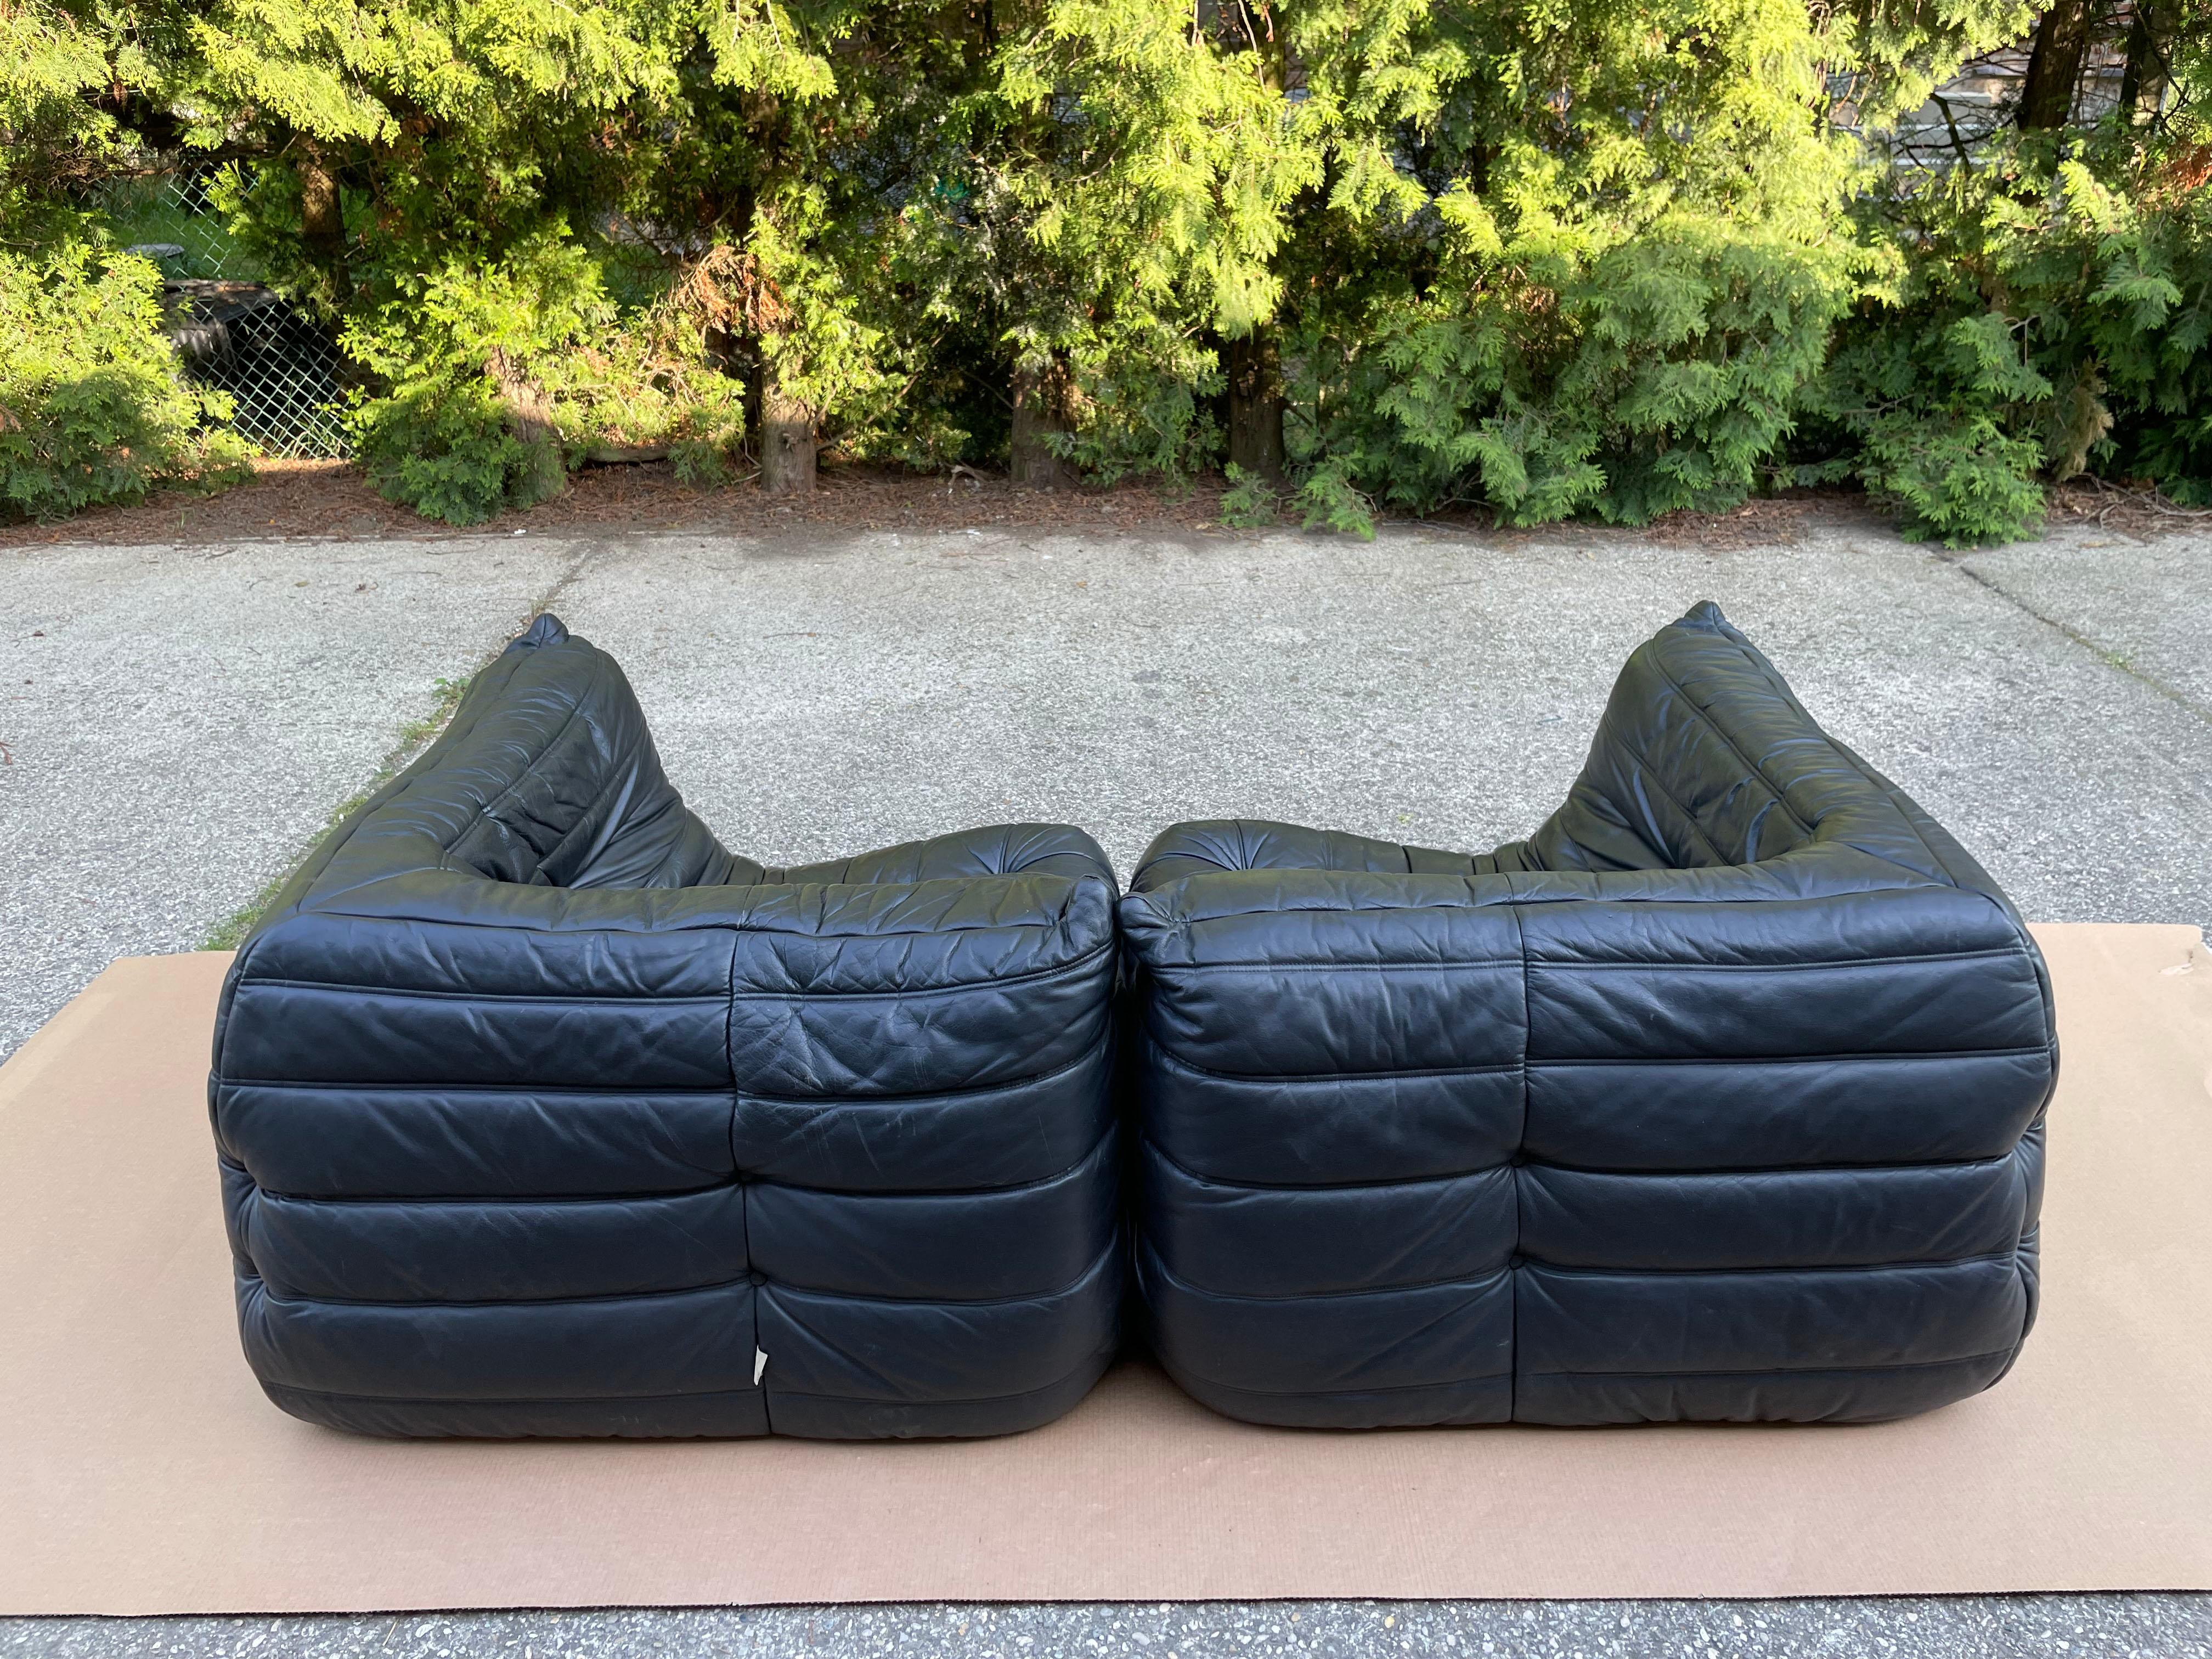 French Pair of Corner Leather Togo Seats, Ligne Roset, Authentic Piece from the 1970s